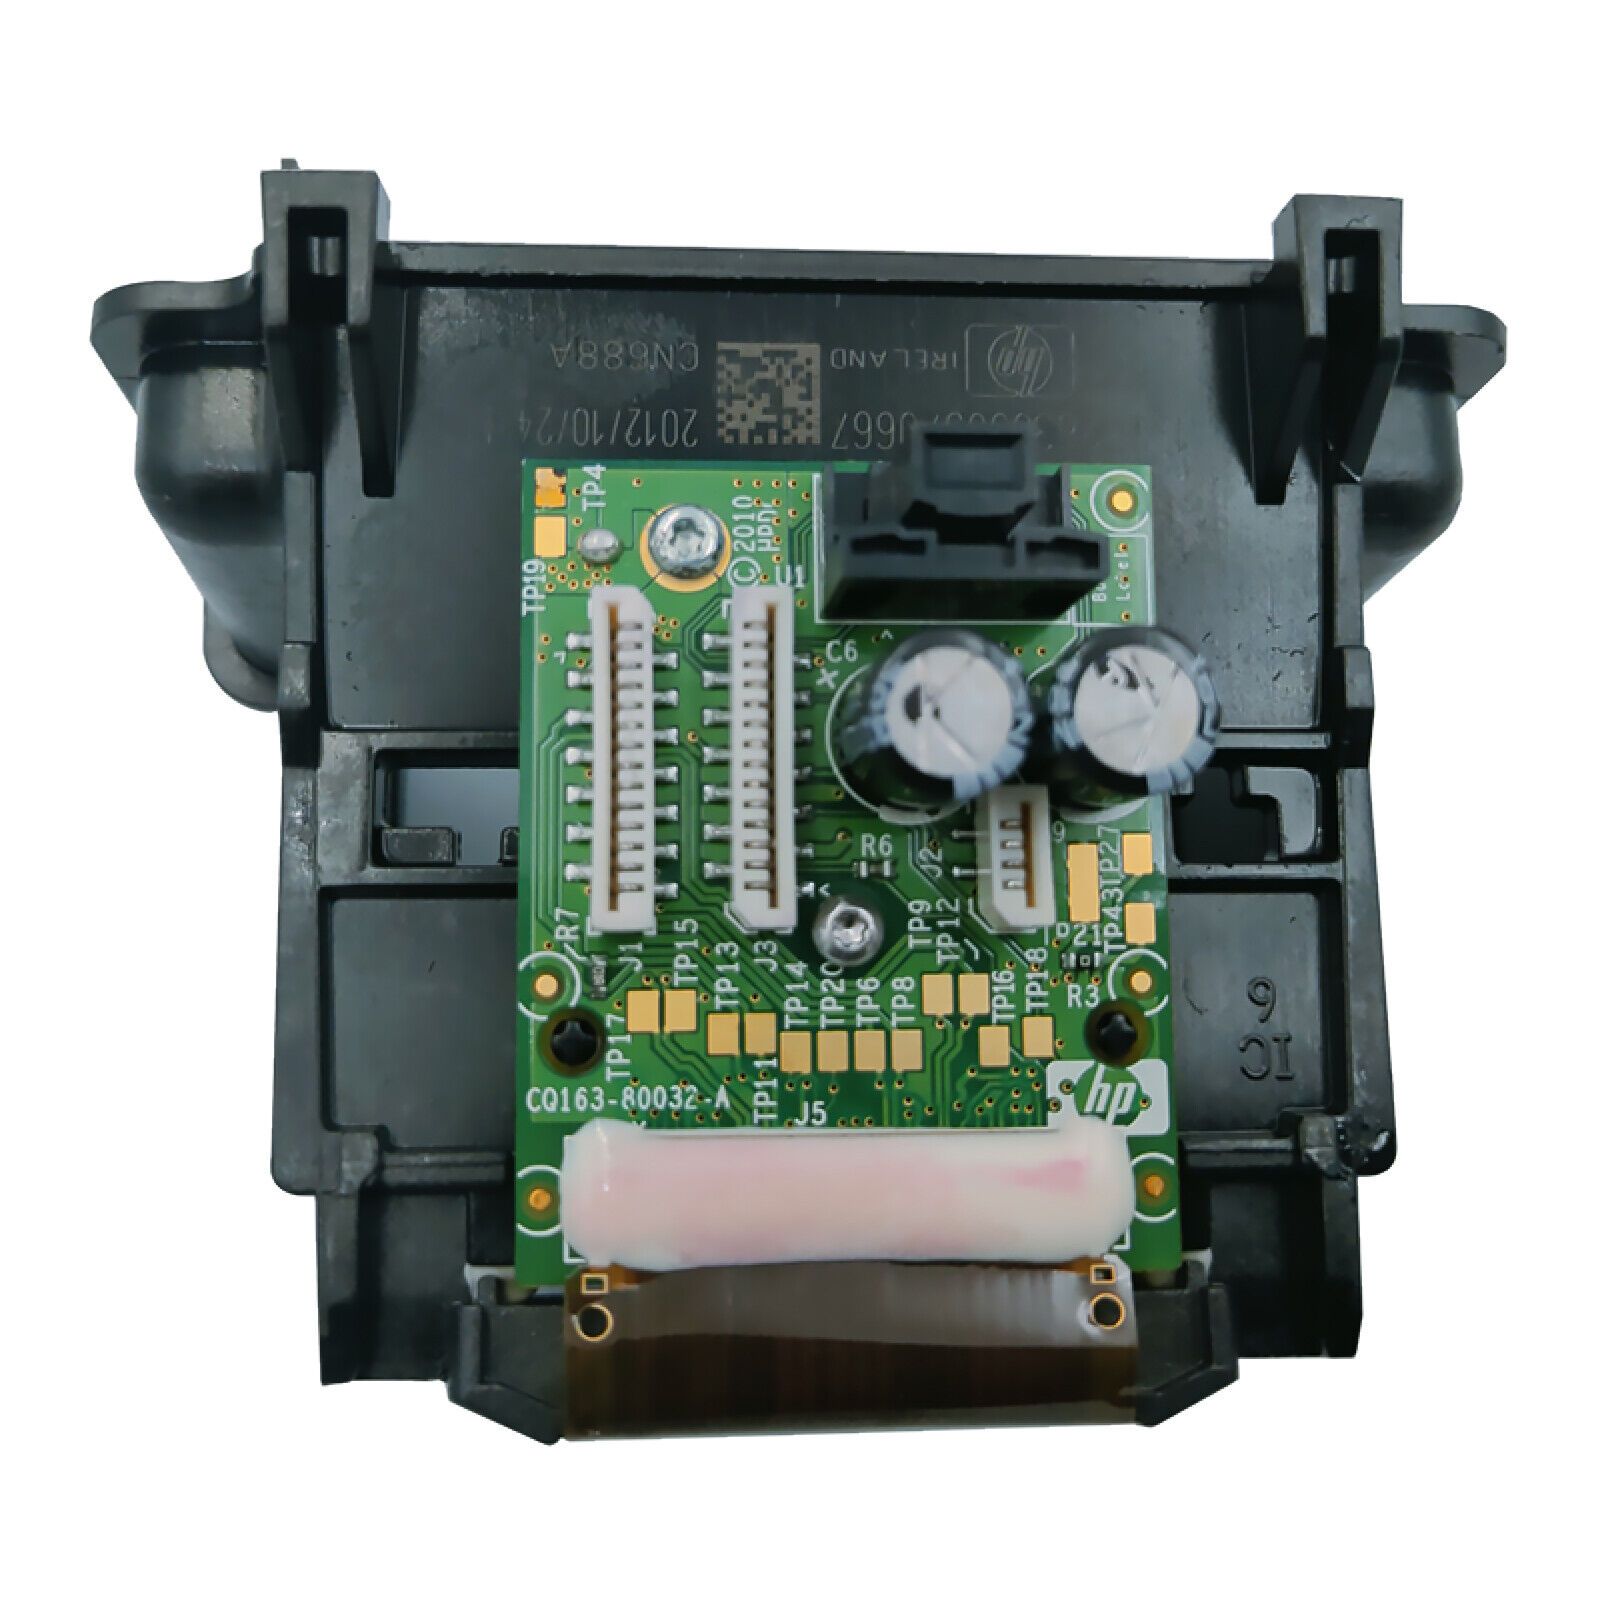 CN688A 4-Slot Print Head Replacement for HP 3070 3520 5525 4620 5520 5510 4615